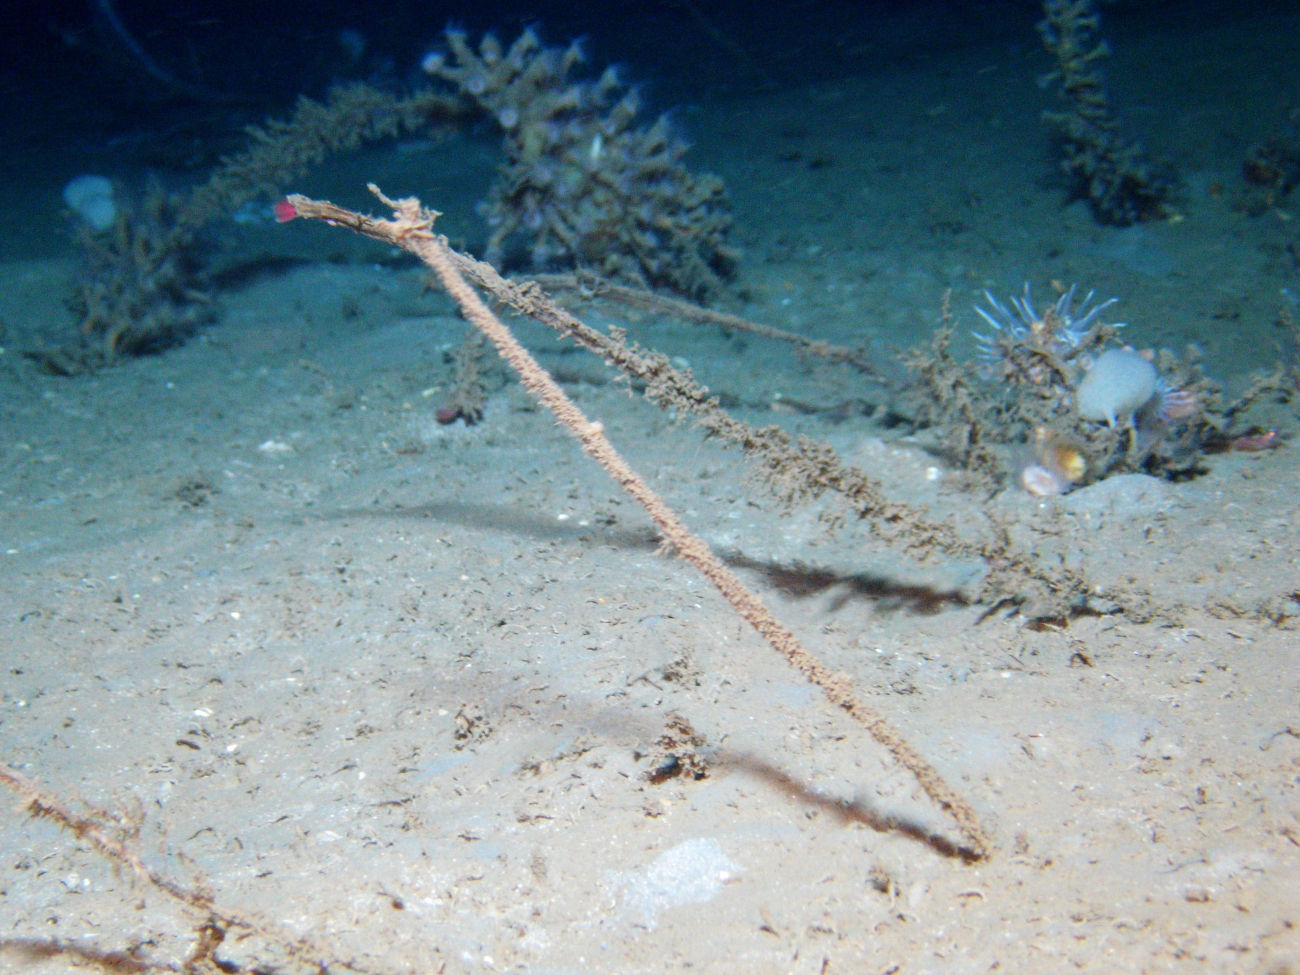 Widely dispersed tube worms